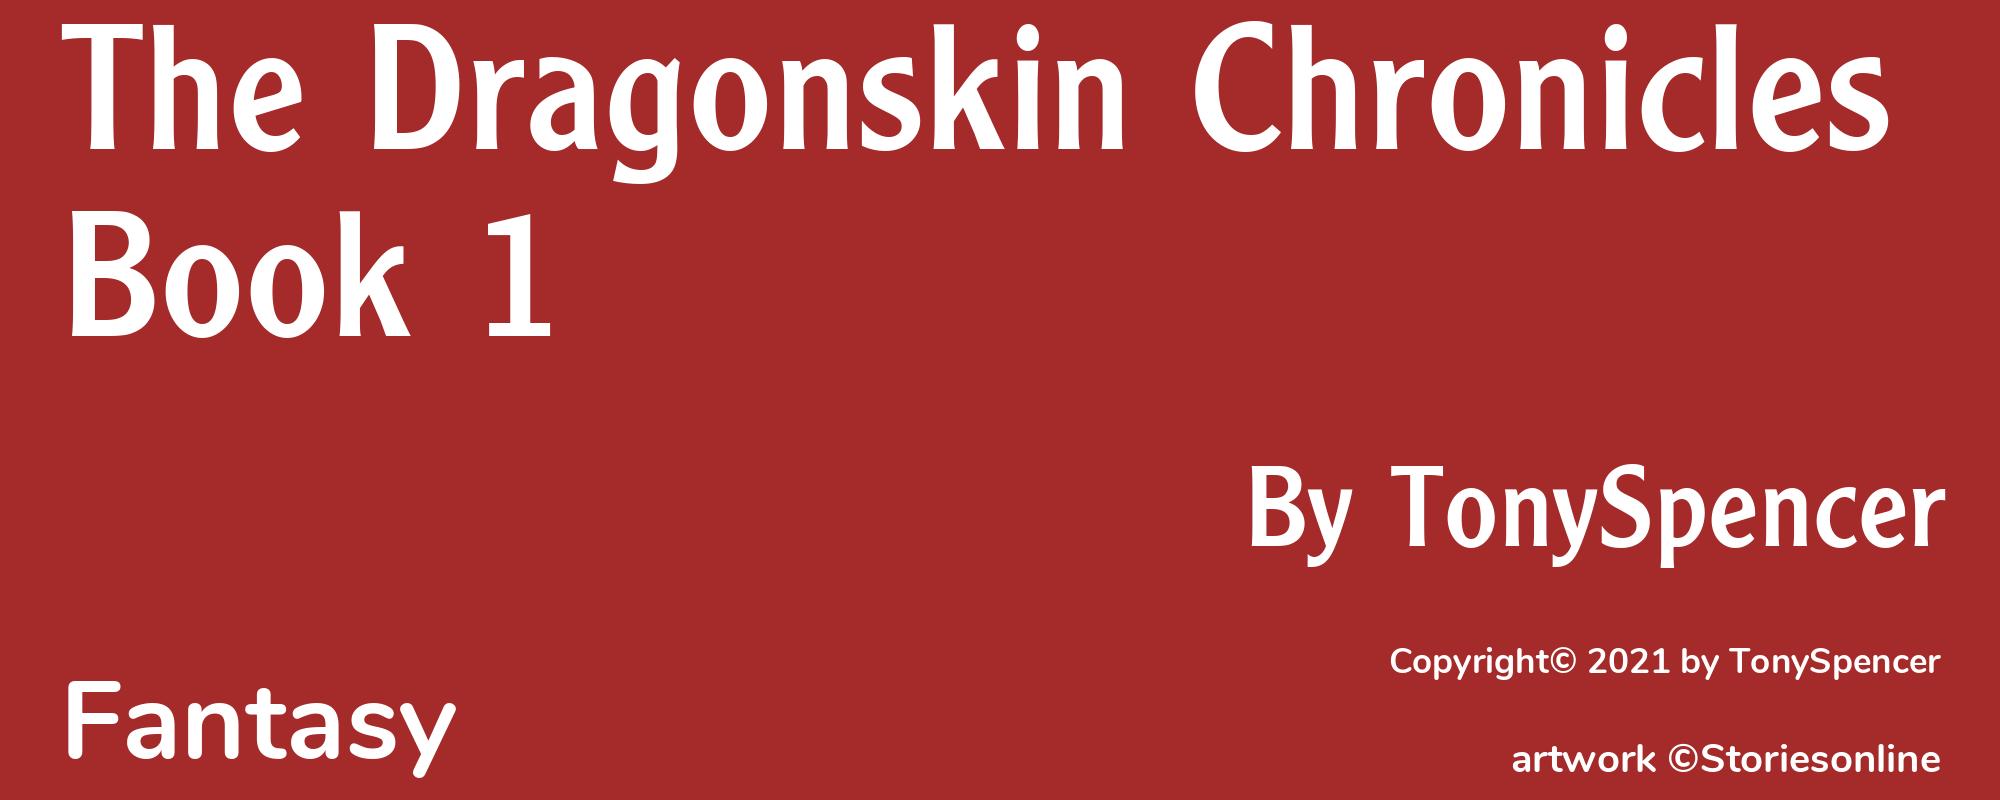 The Dragonskin Chronicles Book 1 - Cover